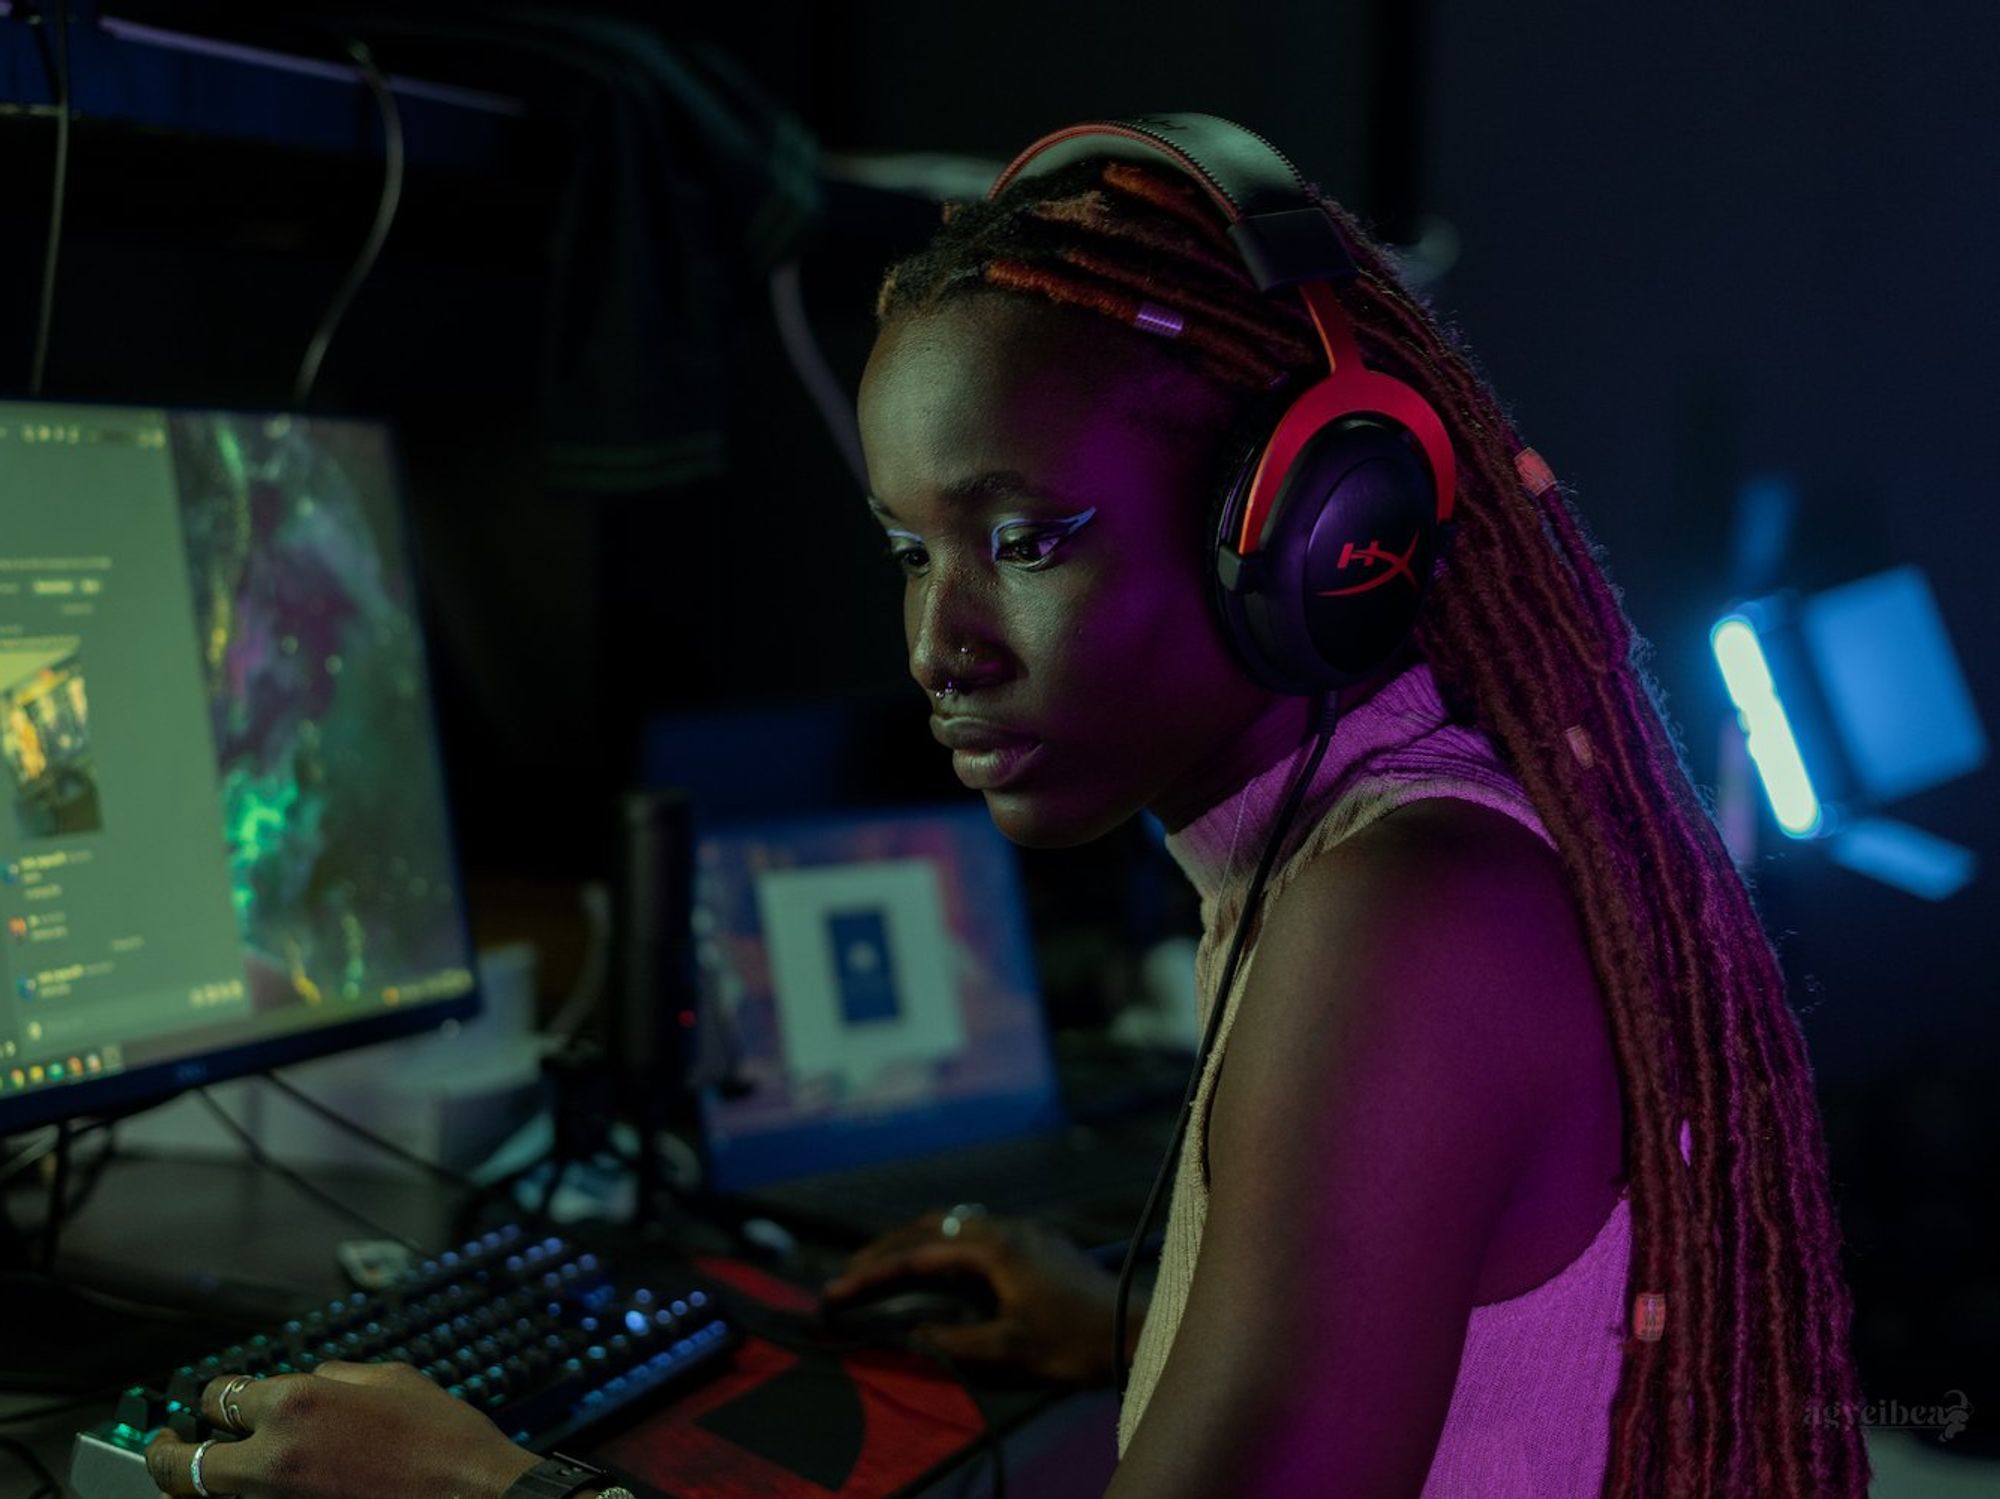 Ritalucia is a professional esports gamer based in Ghana.